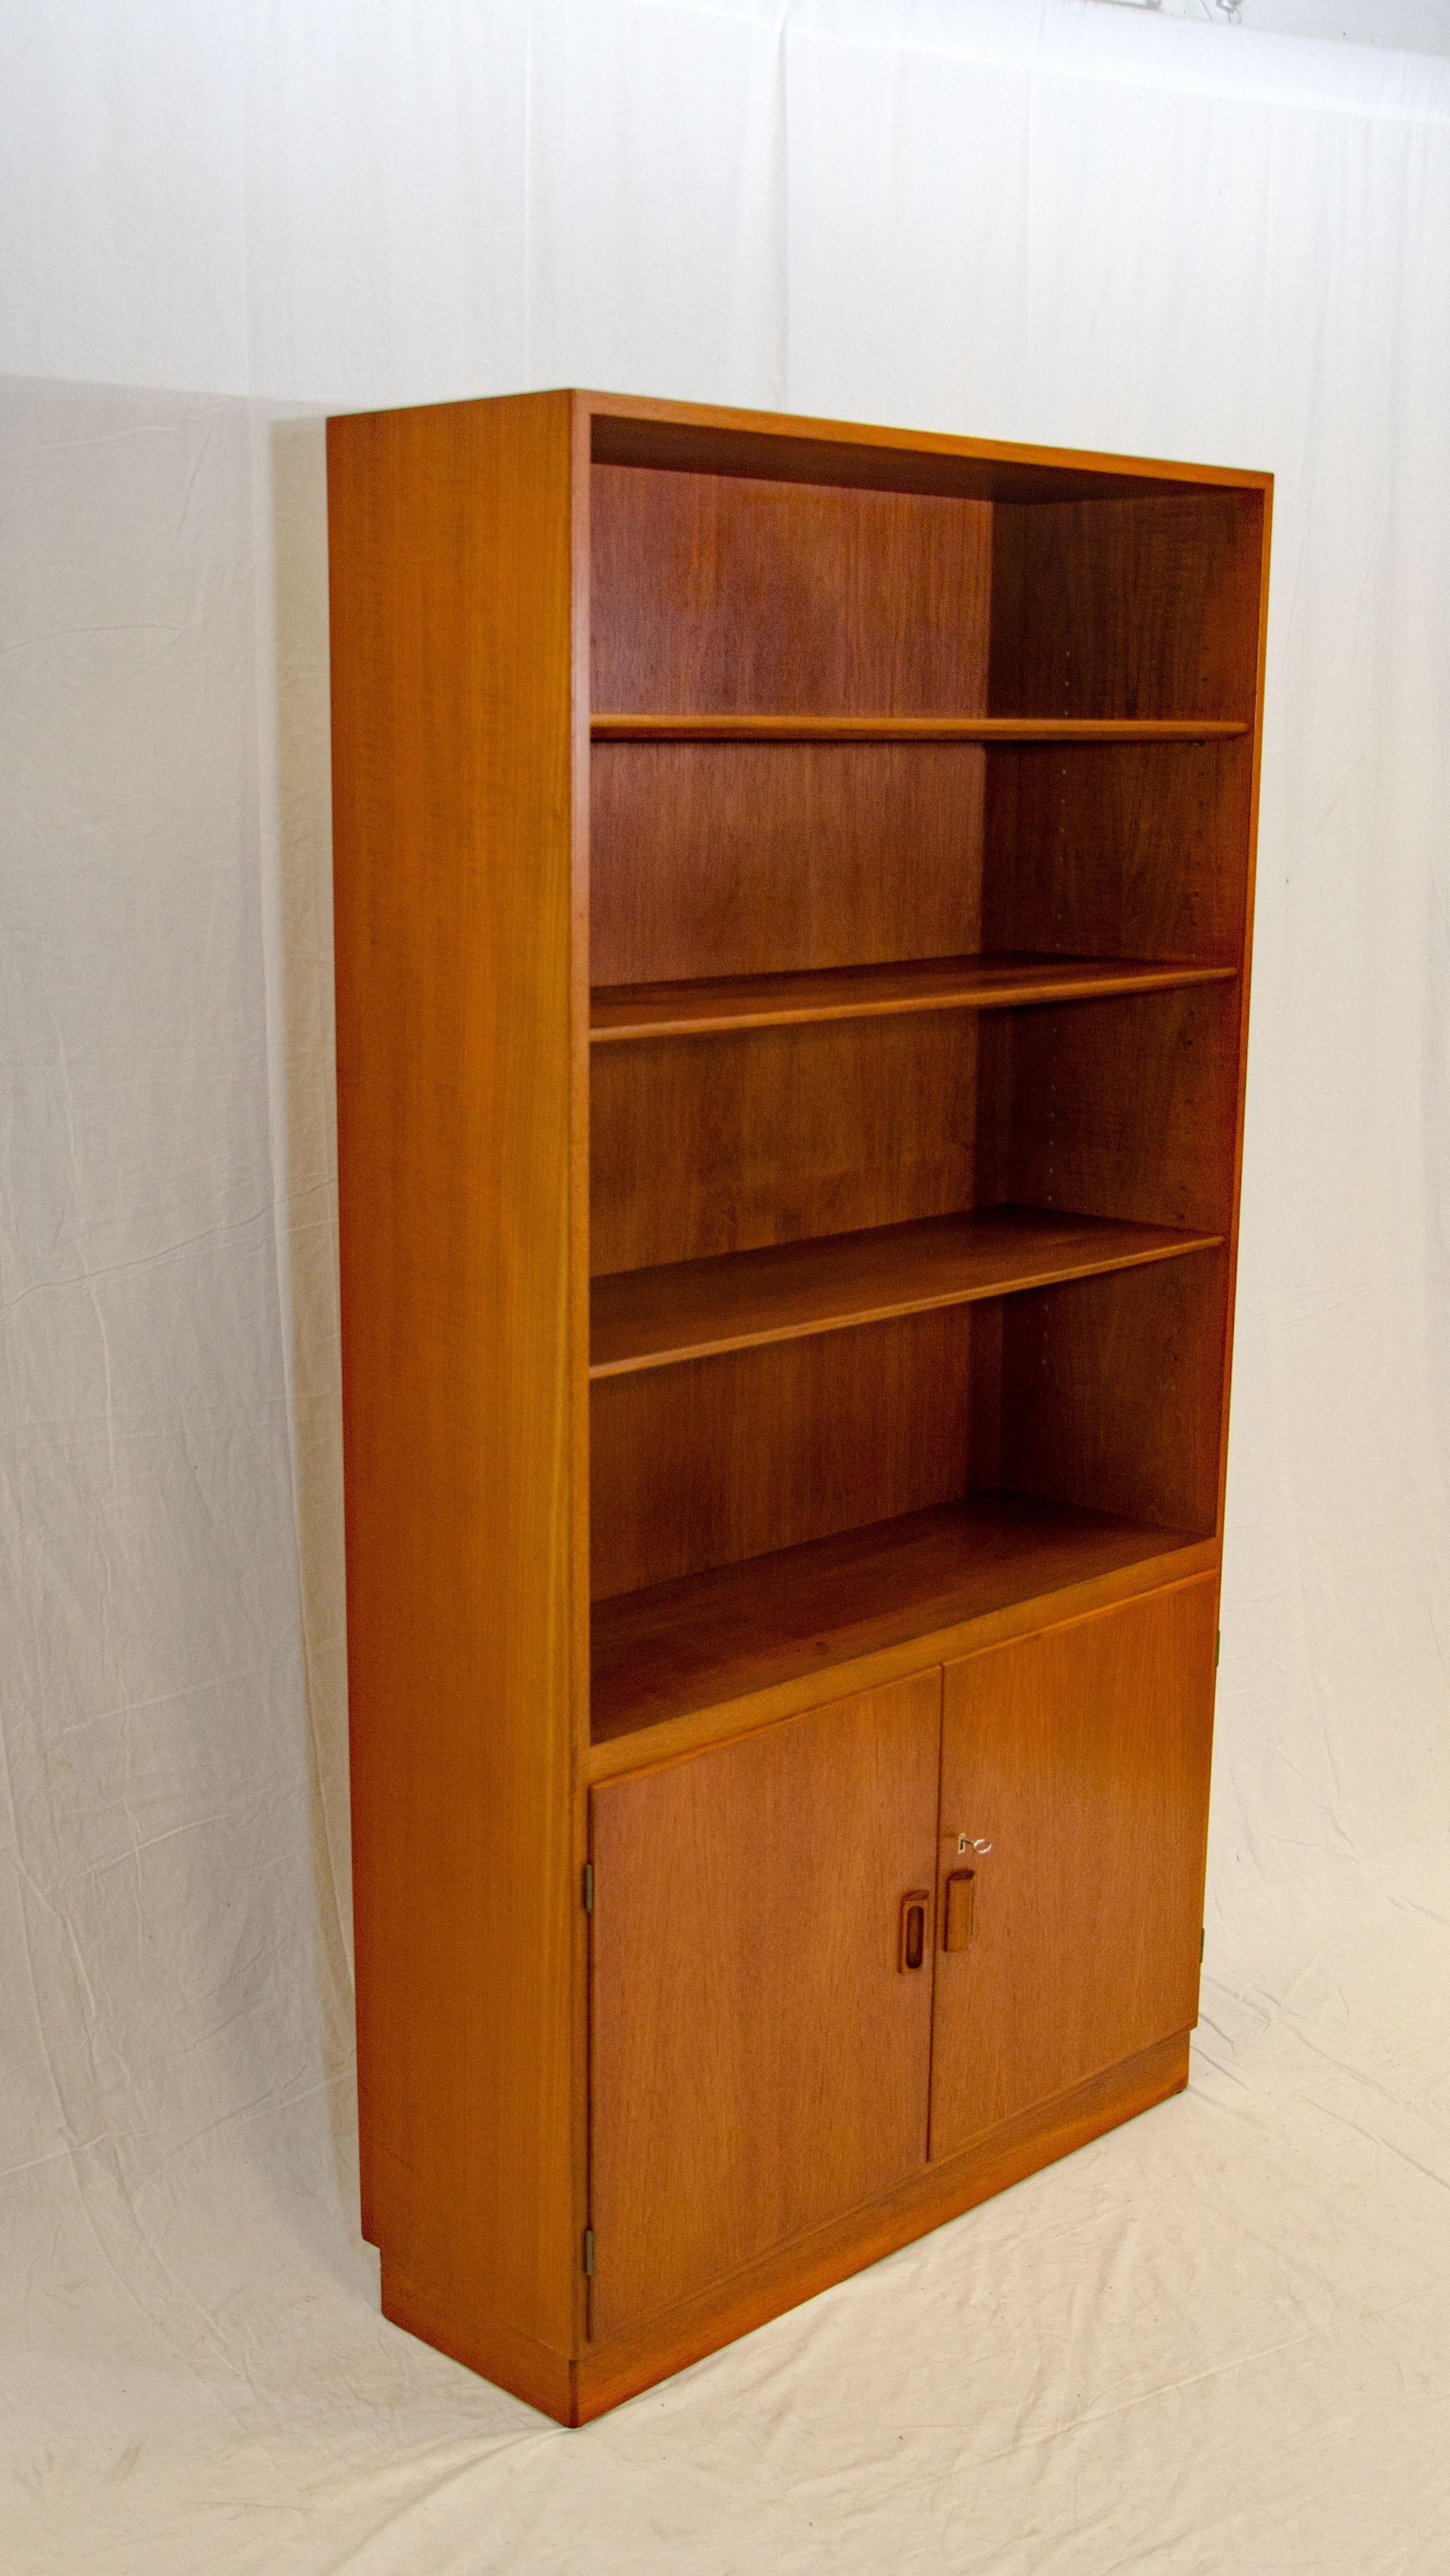 Nice useful bookcase with adjustable shelves as well as a storage cabinet on a small 3